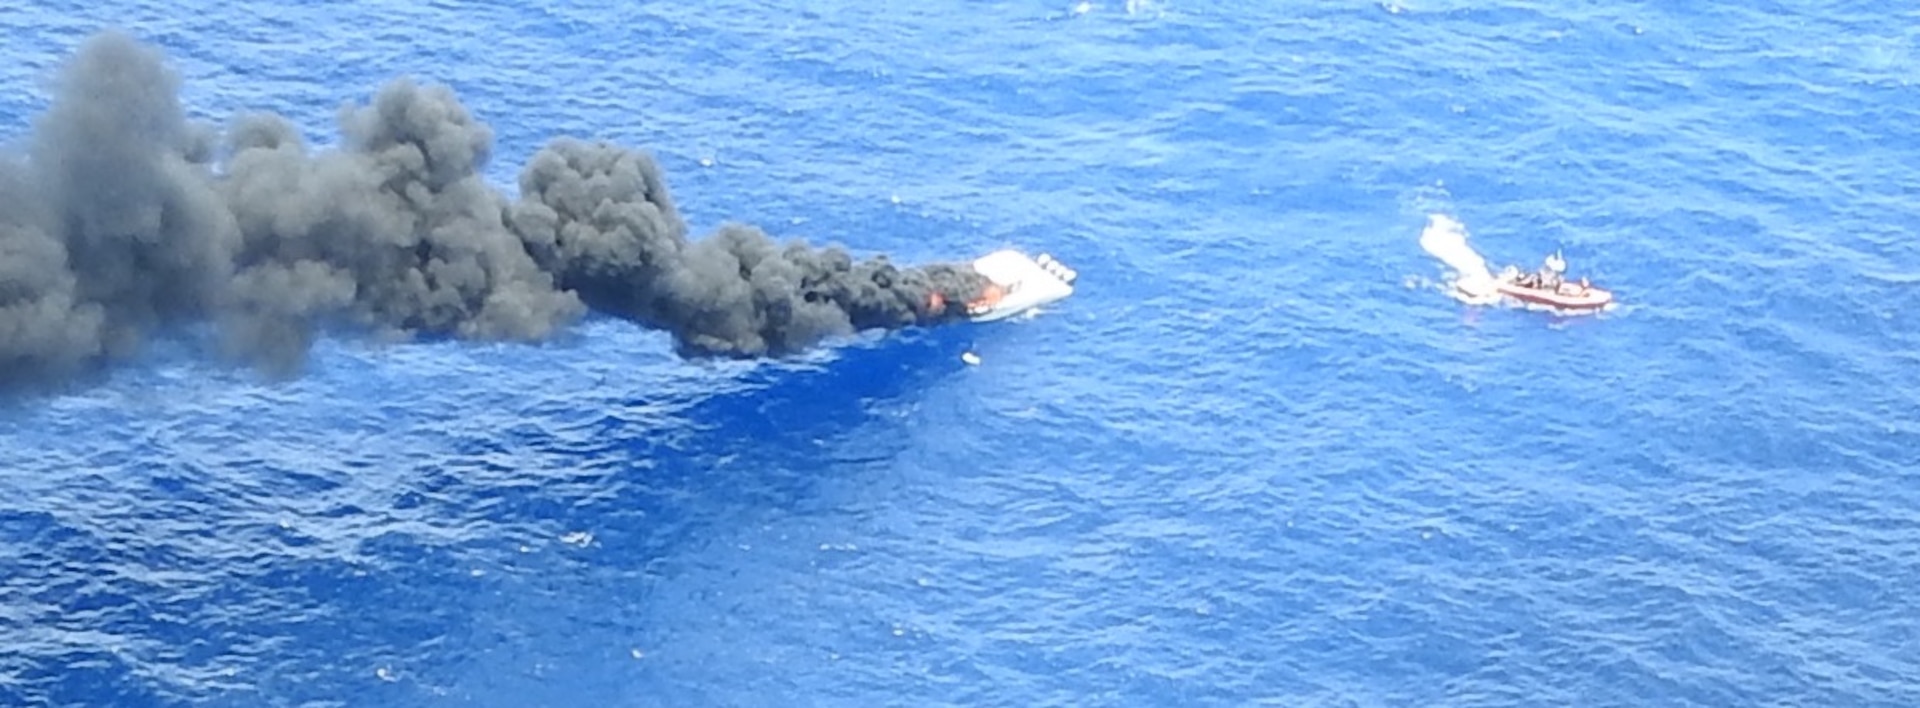 Coast Guard and Broward Country Fire rescue respond to burning vessel near Dania Beach.